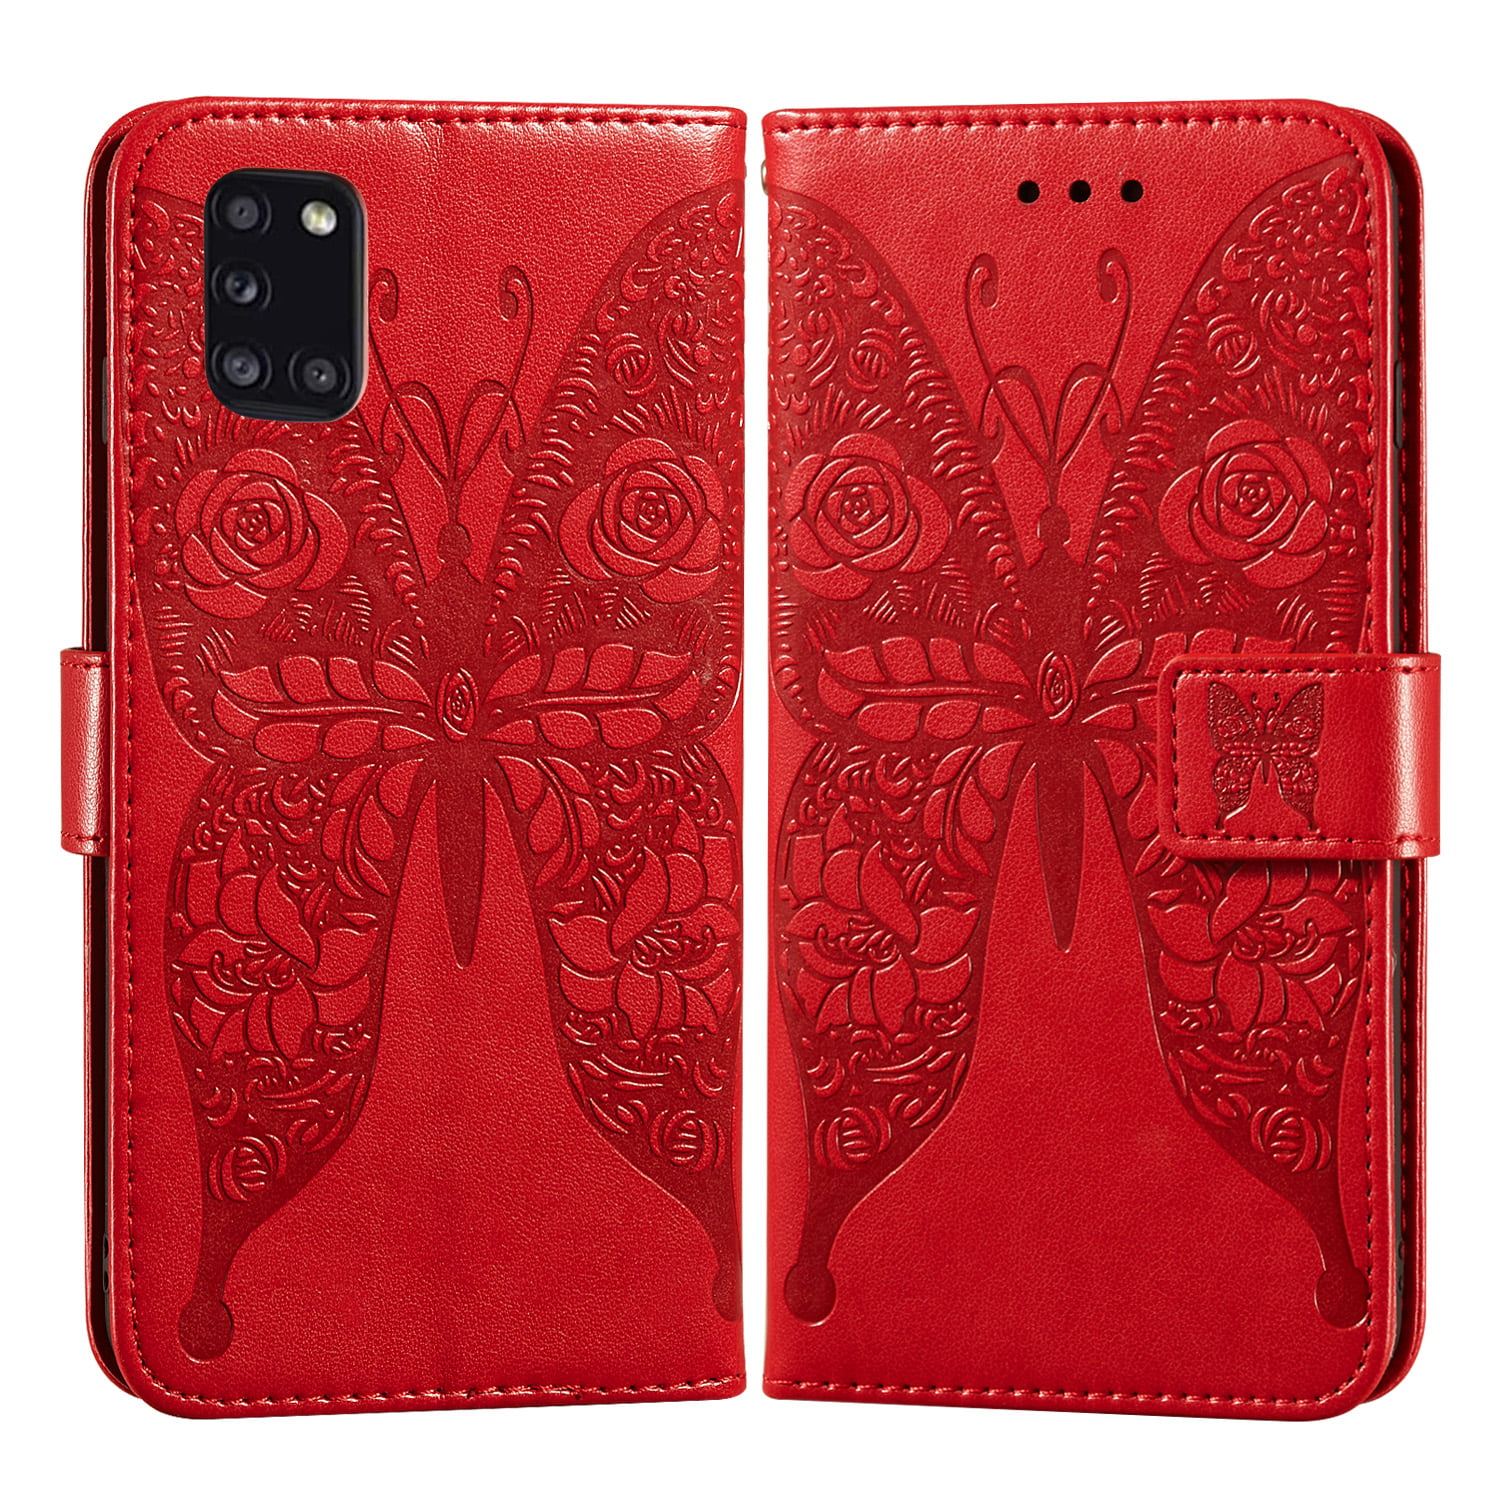 PU Leather Shockproof Notebook Wallet Butterfly Phone Case with Kickstand Card Slots Magnetic Soft TPU Bumper Flip Folio Protective Cover for Samsung Galaxy A71 black Samsung Galaxy A71 Case